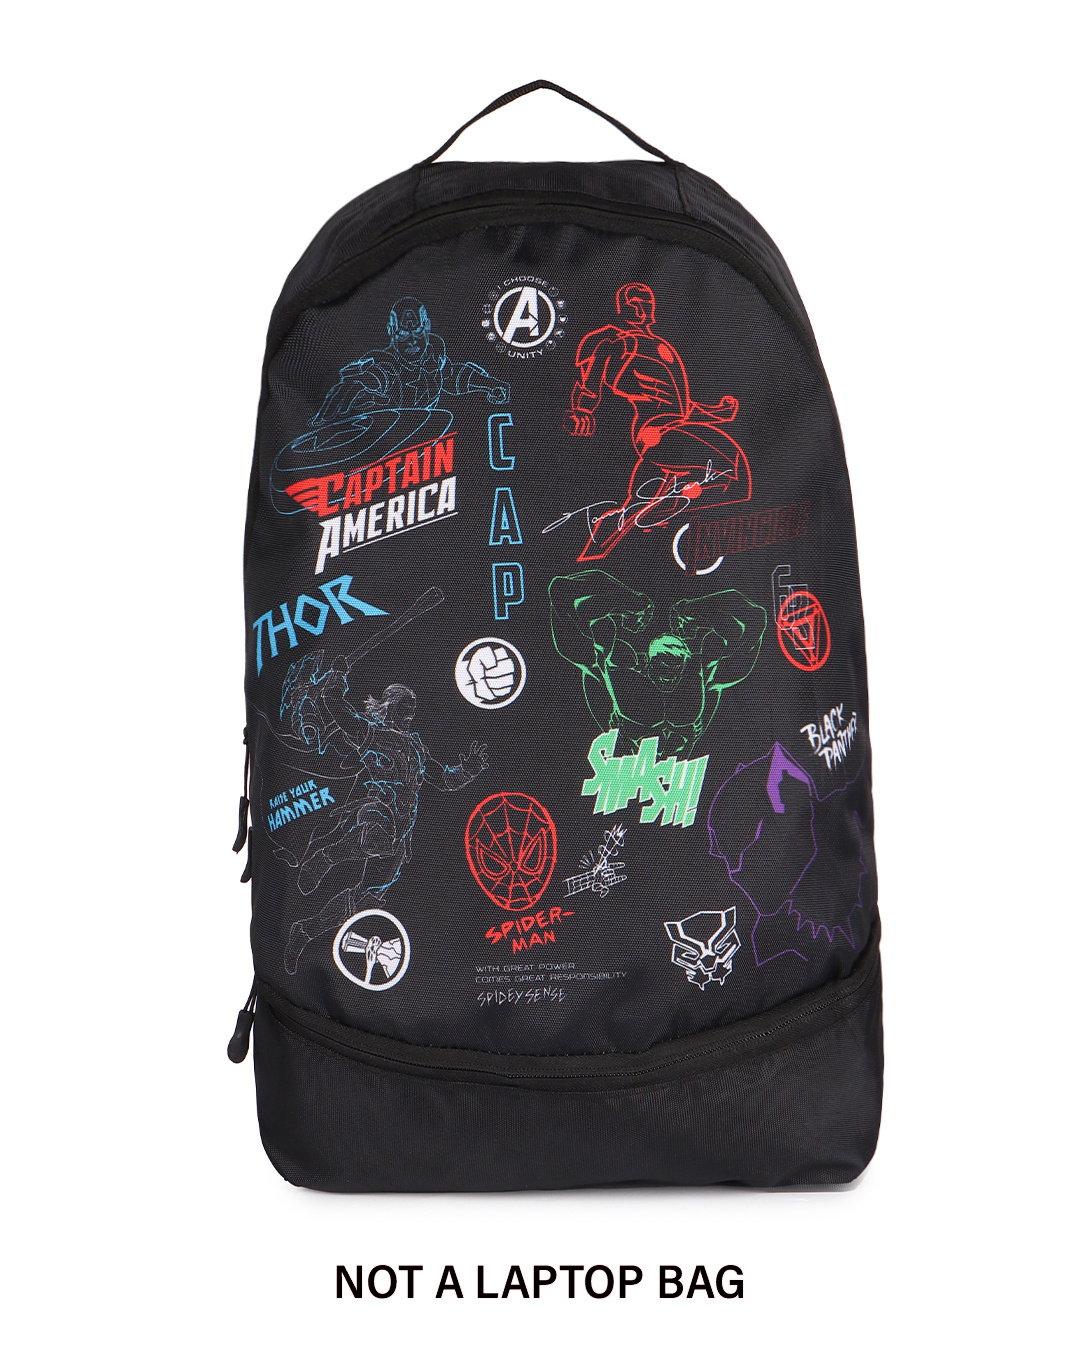 Buy THRUMM Avengers - Endgame 2019 Laptop Bag Backpack with USB Charging  Port Tech Nylon Black Printed Back Pack With Vibrant Print at Amazon.in